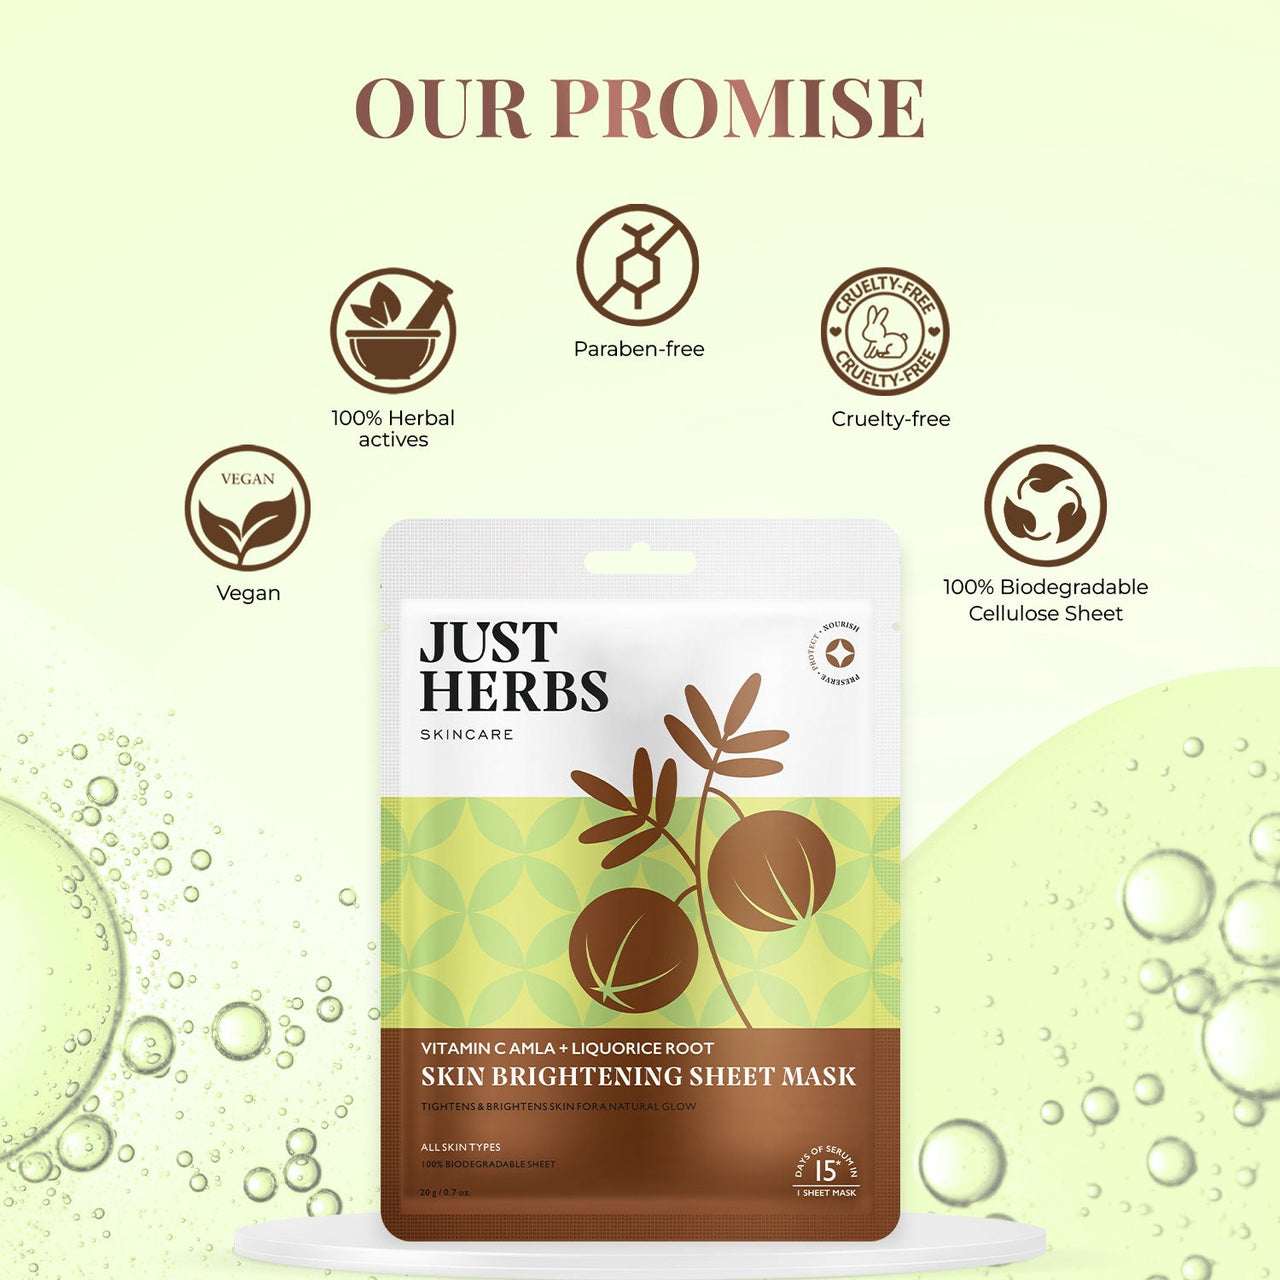 Vitamin C Amla Sheet Mask with Liquorice Root for Skin Brightening - pack of 4